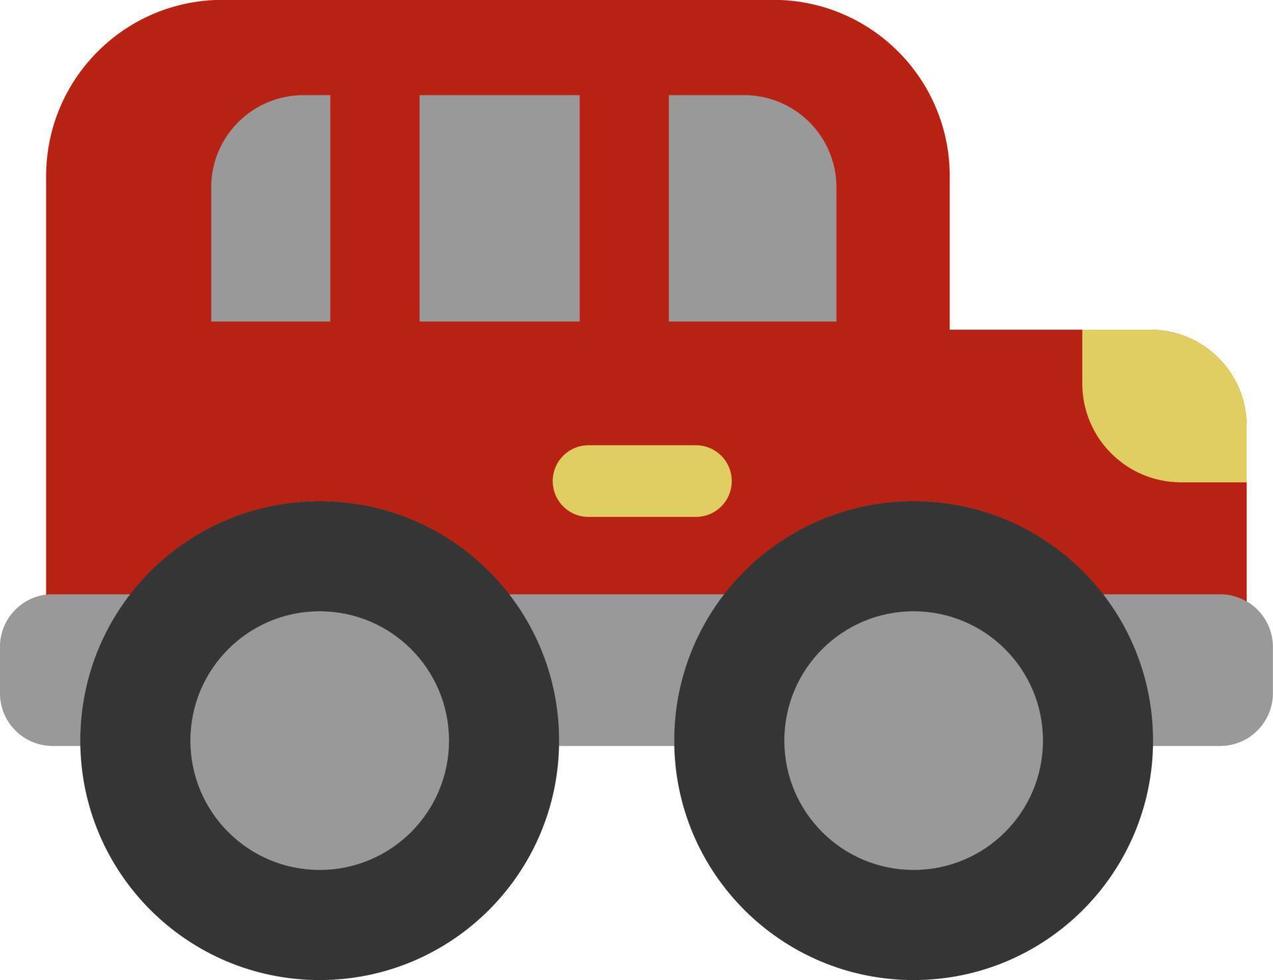 Off road red transport car, illustration, vector on a white background.